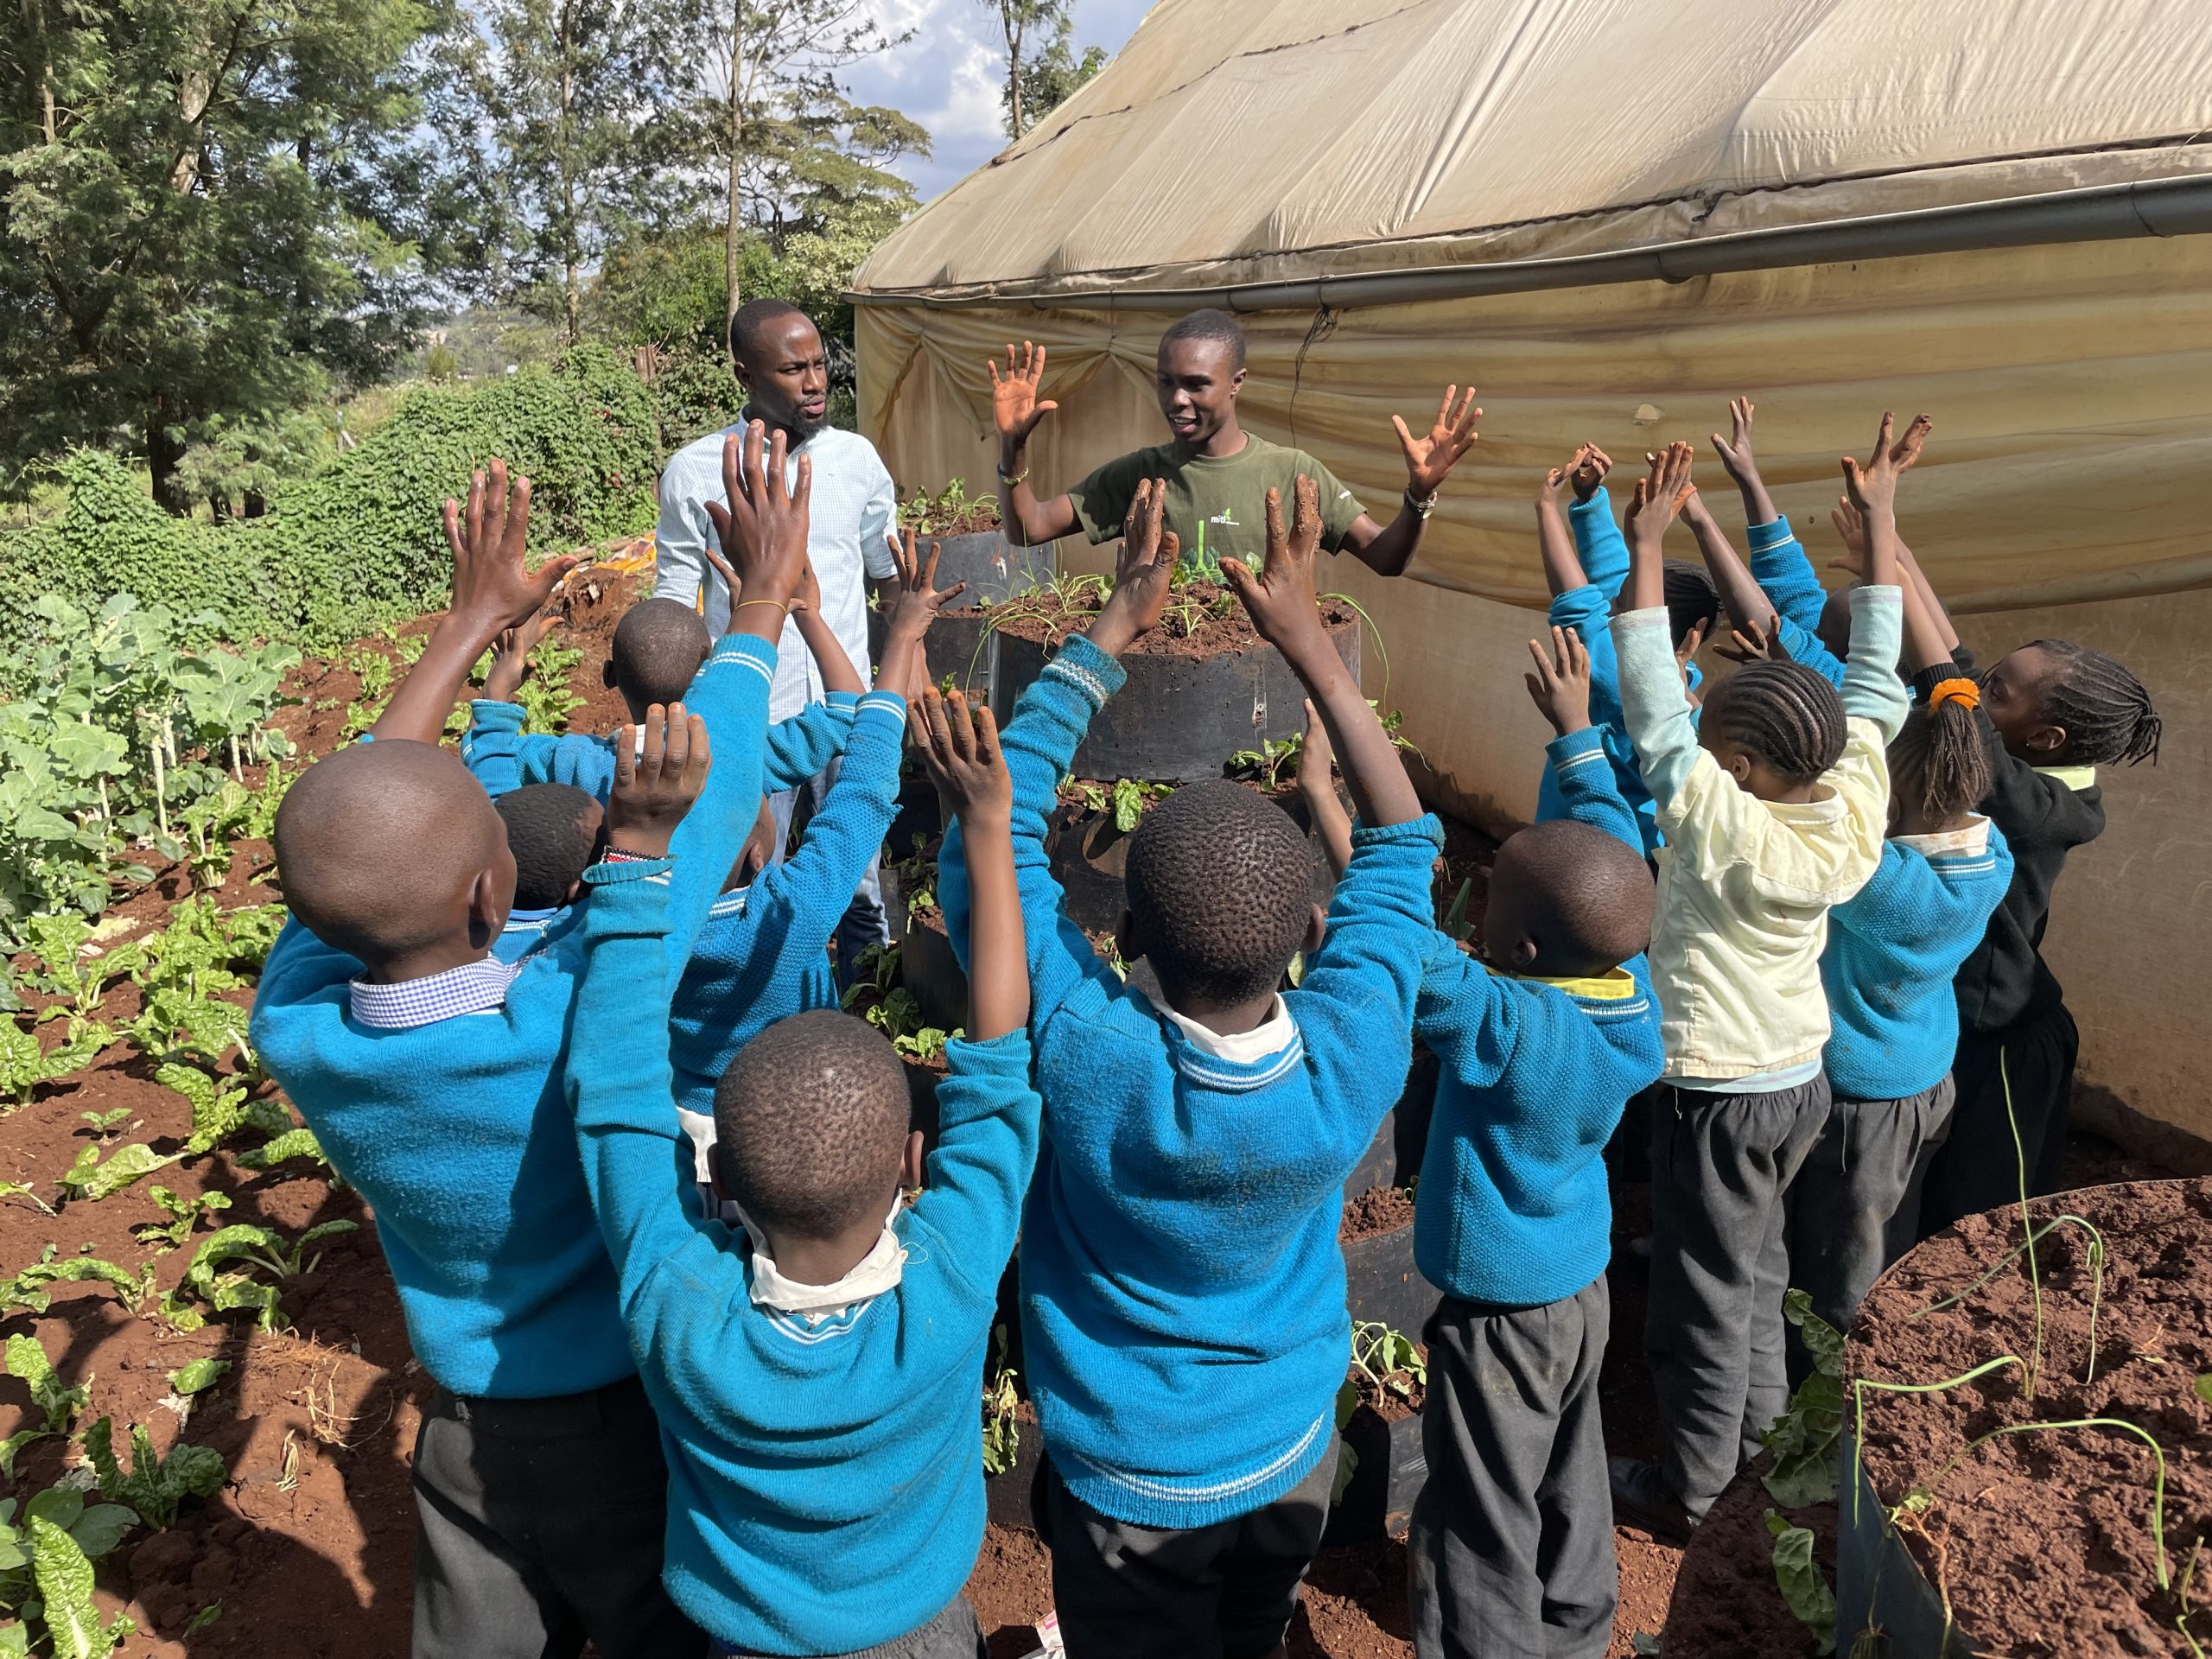 The IVLP Impact Award project, Ukulima Wima, sought to make children's homes in Nairobi more self-reliant by providing them with the Ukulima Wima pod (a vertical farm), and taught children about gardening.